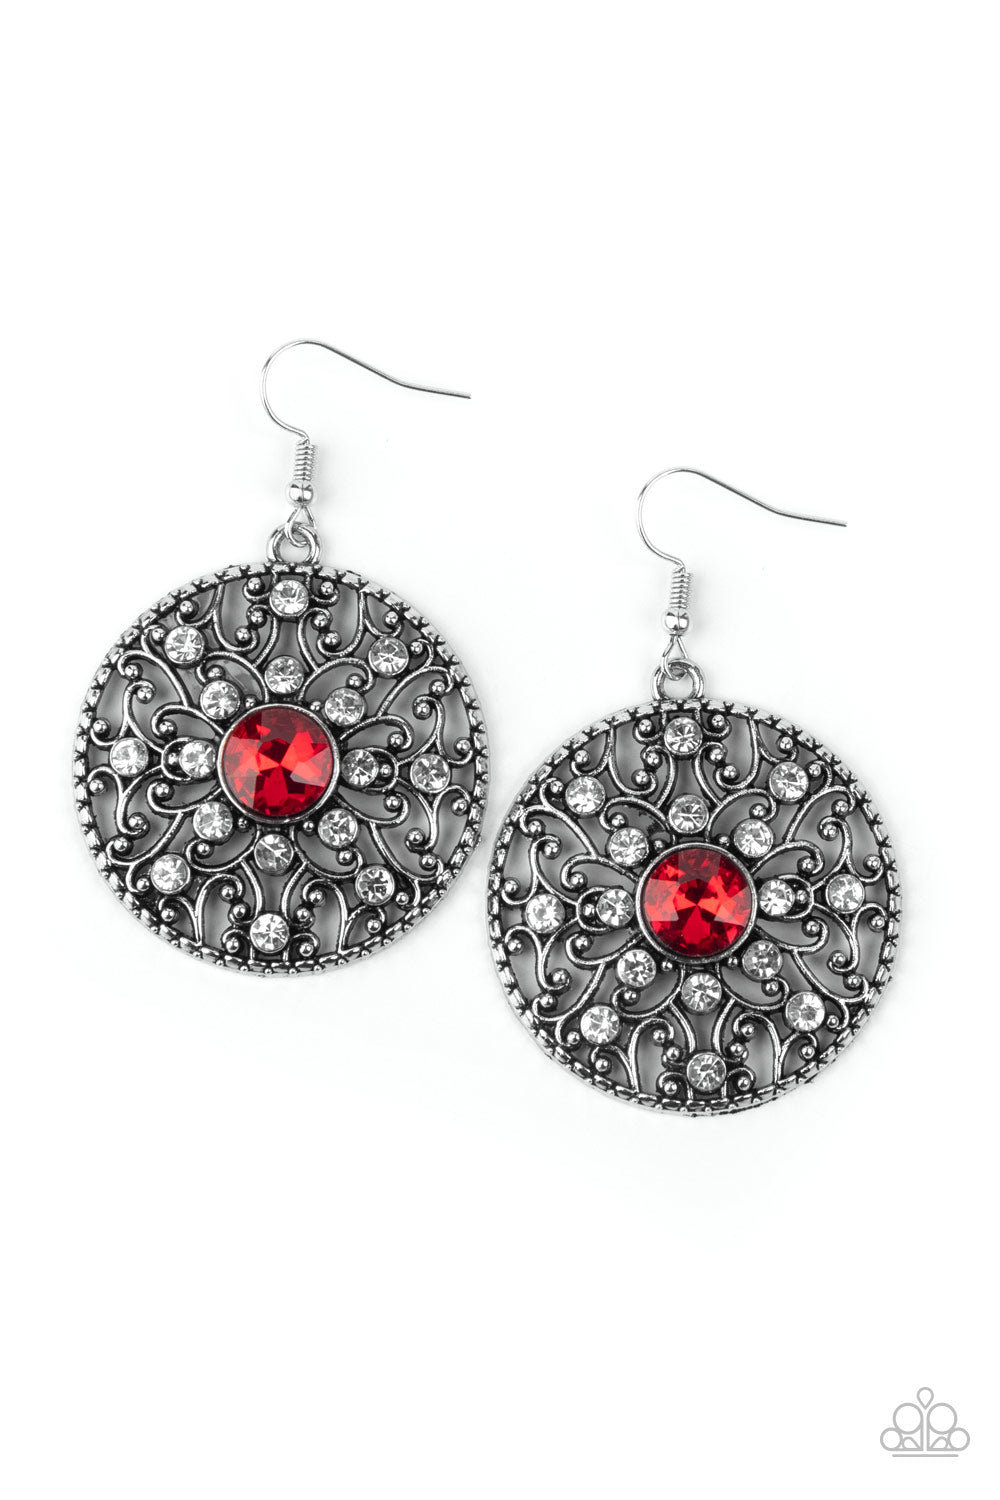 Paparazzi Accessories - GLOW Your True Colors - Red Earrings - Alies Bling Bar